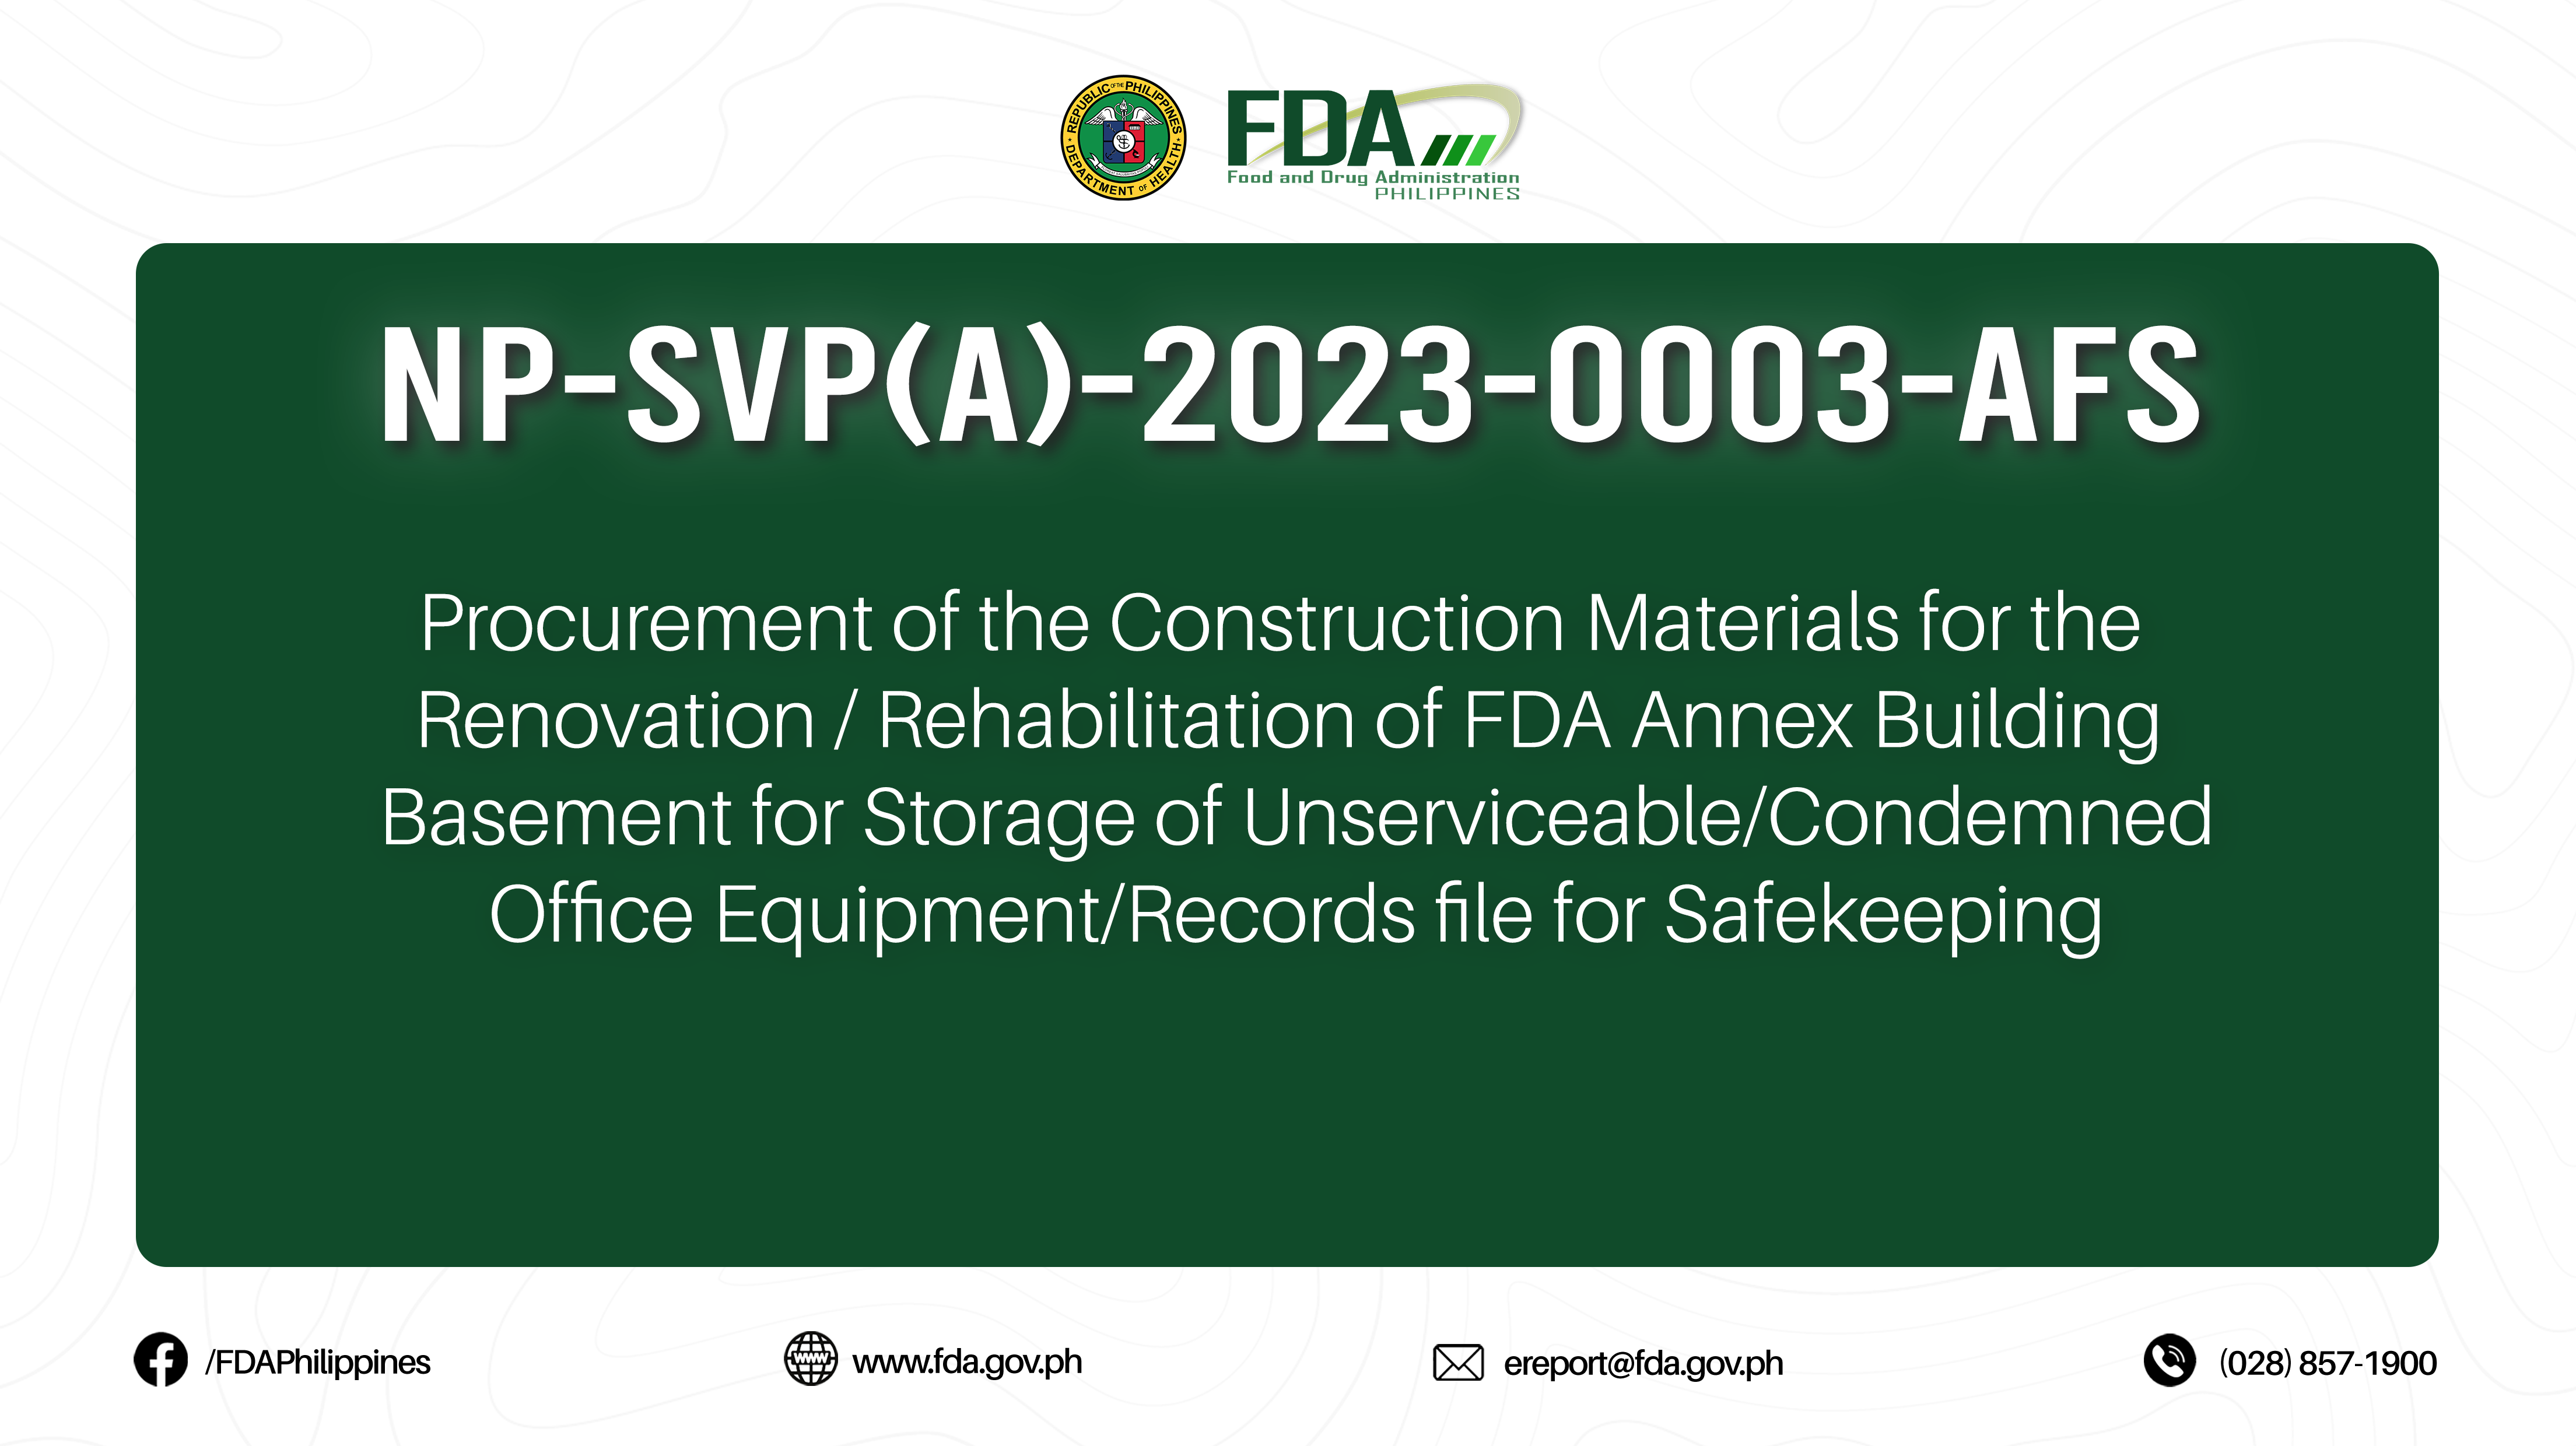 NP-SVP(A)-2023-0003-AFS || Procurement of the Construction Materials for the  Renovation / Rehabilitation of FDA Annex Building  Basement for Storage of Unserviceable/Condemned  Office Equipment/Records file for Safekeeping